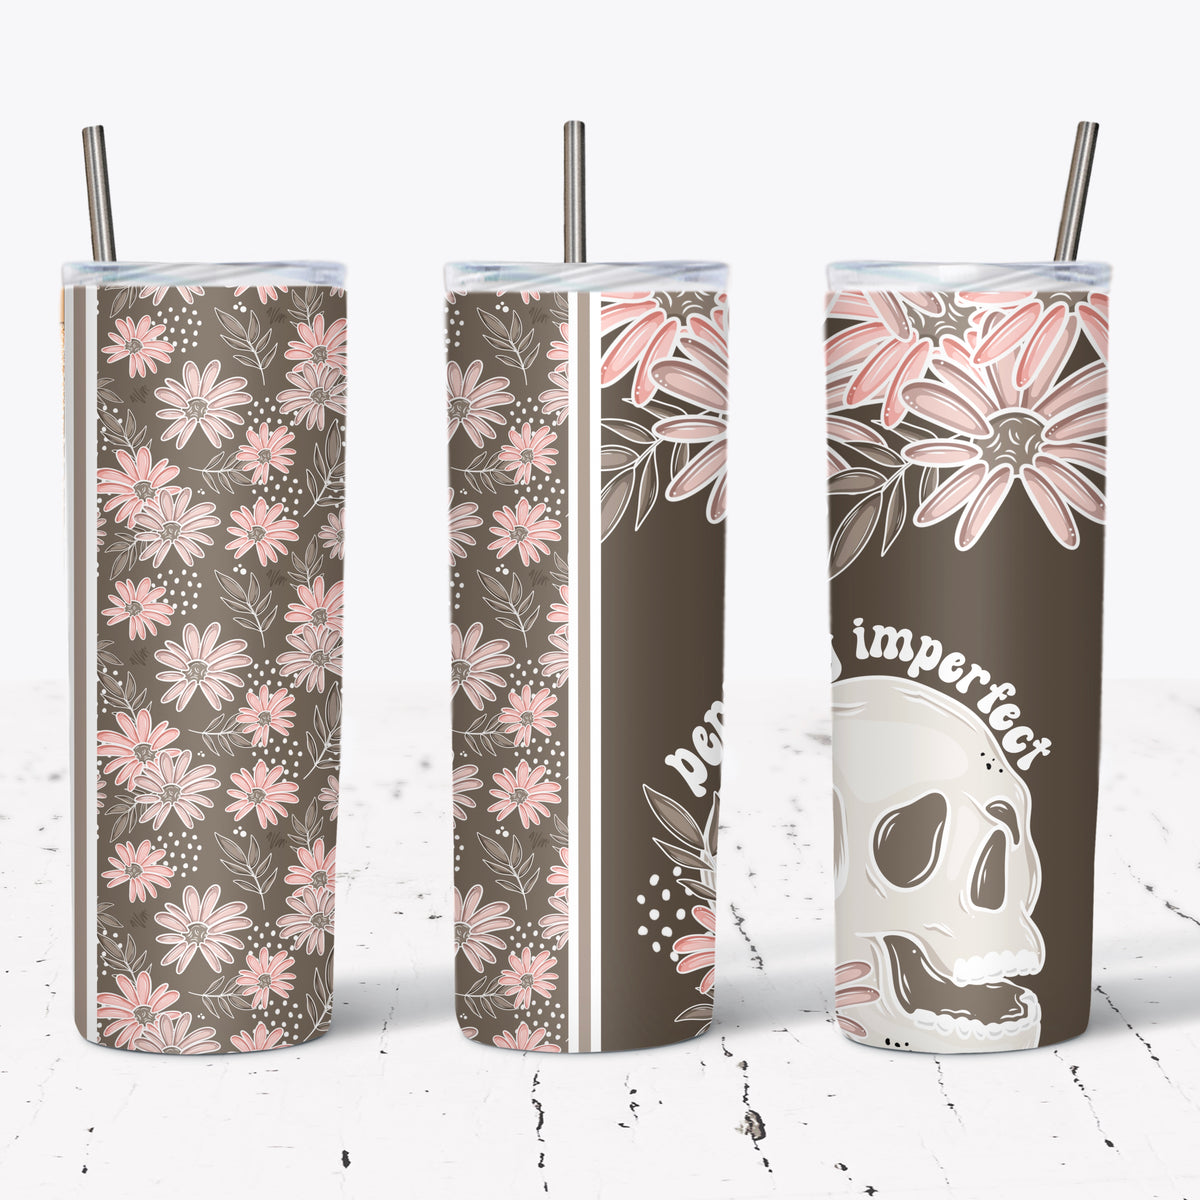 Perfectly Imperfect Tumbler Wrap